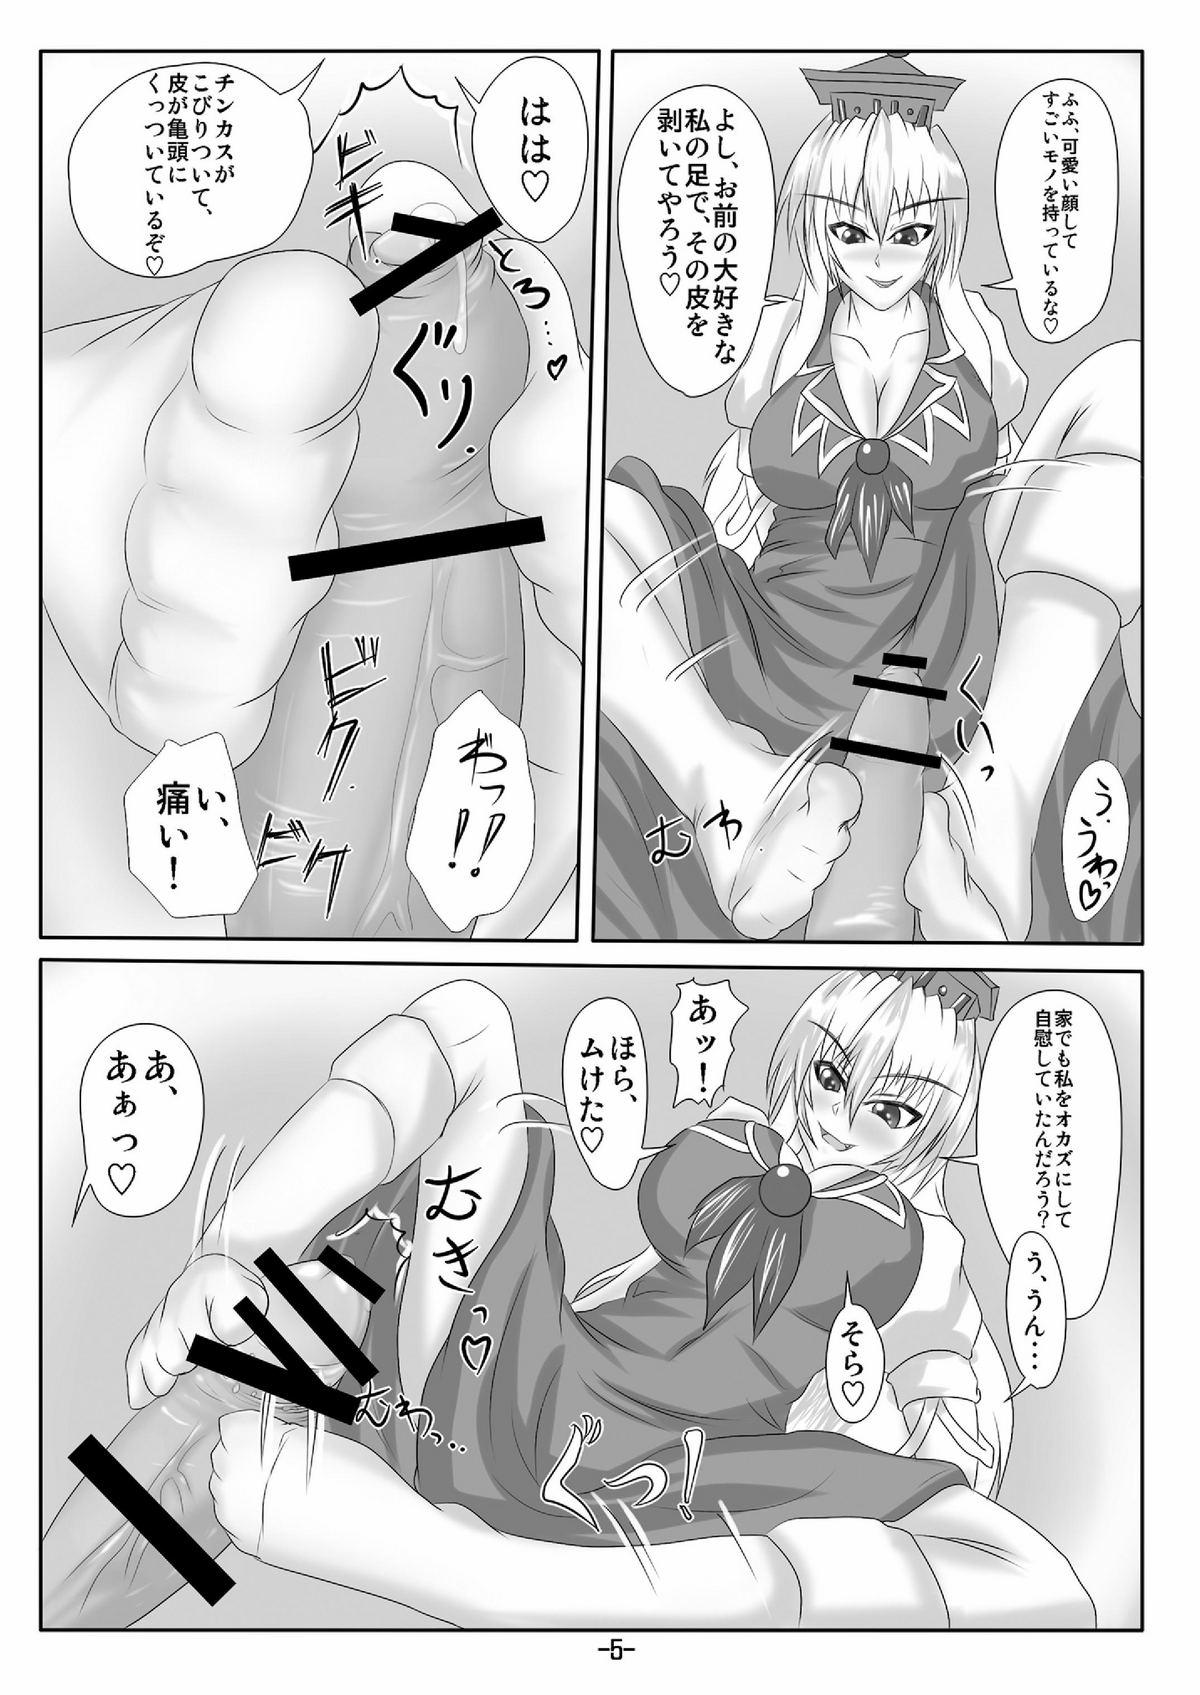 Australian Blue Dominator - Touhou project Shaved - Page 7